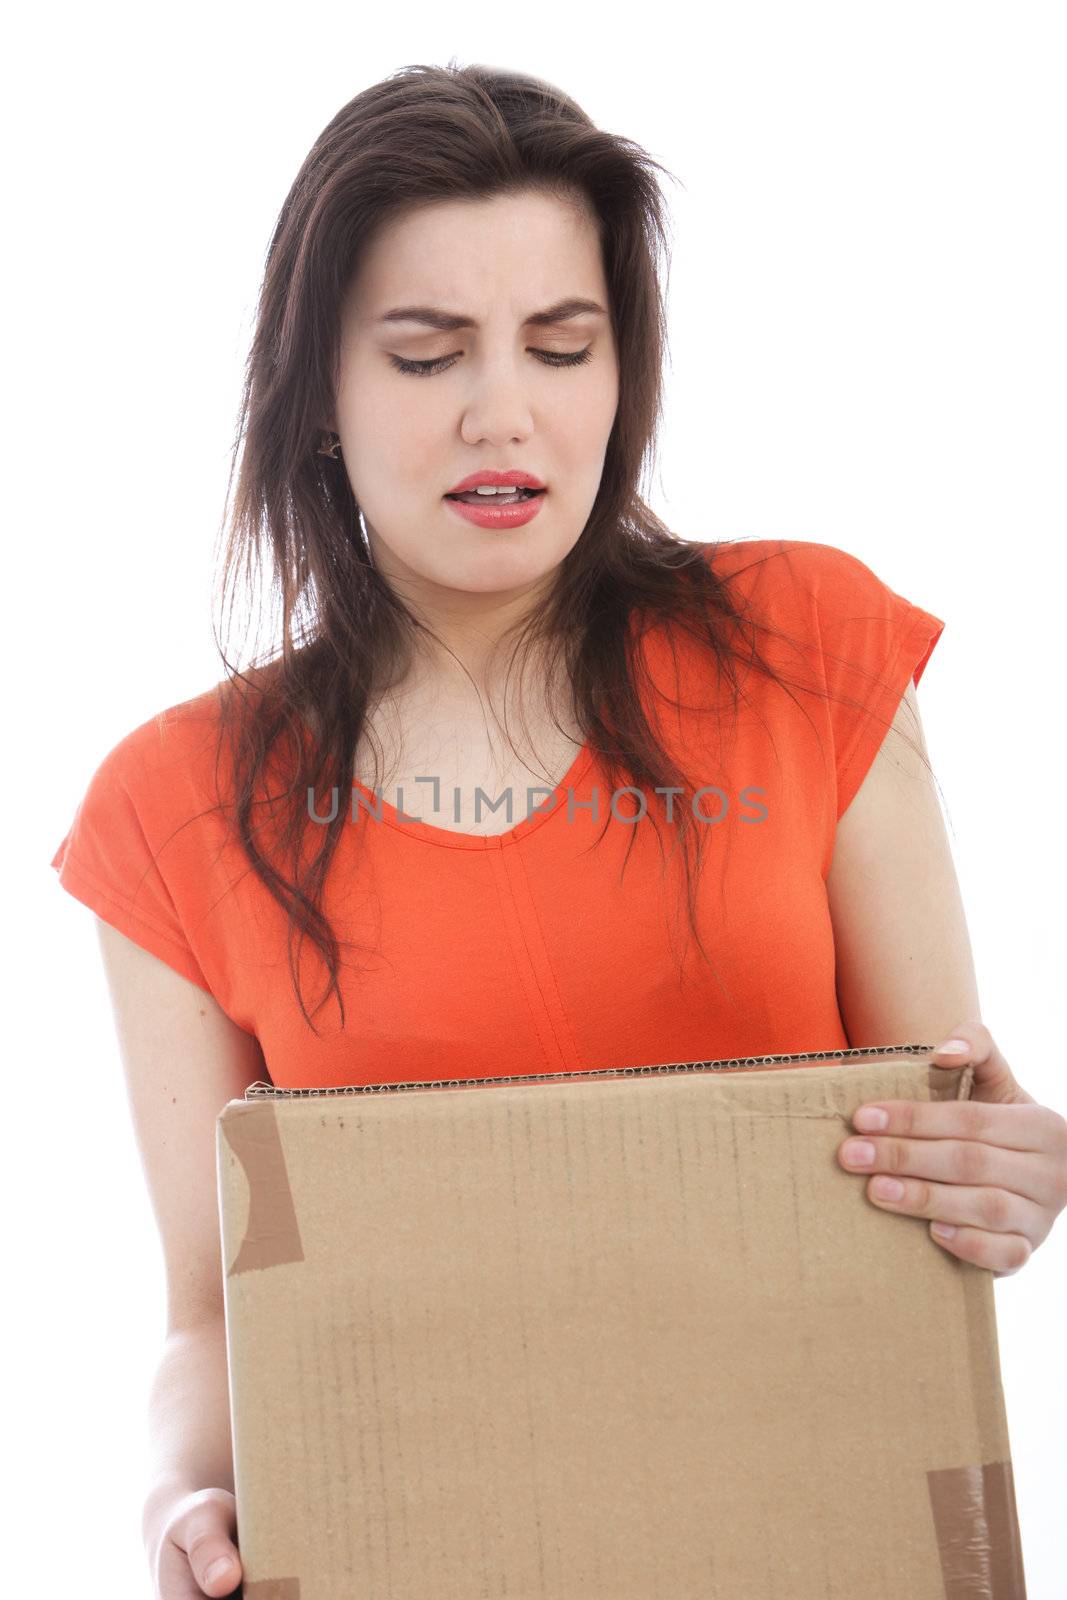 Young brunette woman carrying a cardboard box by Farina6000